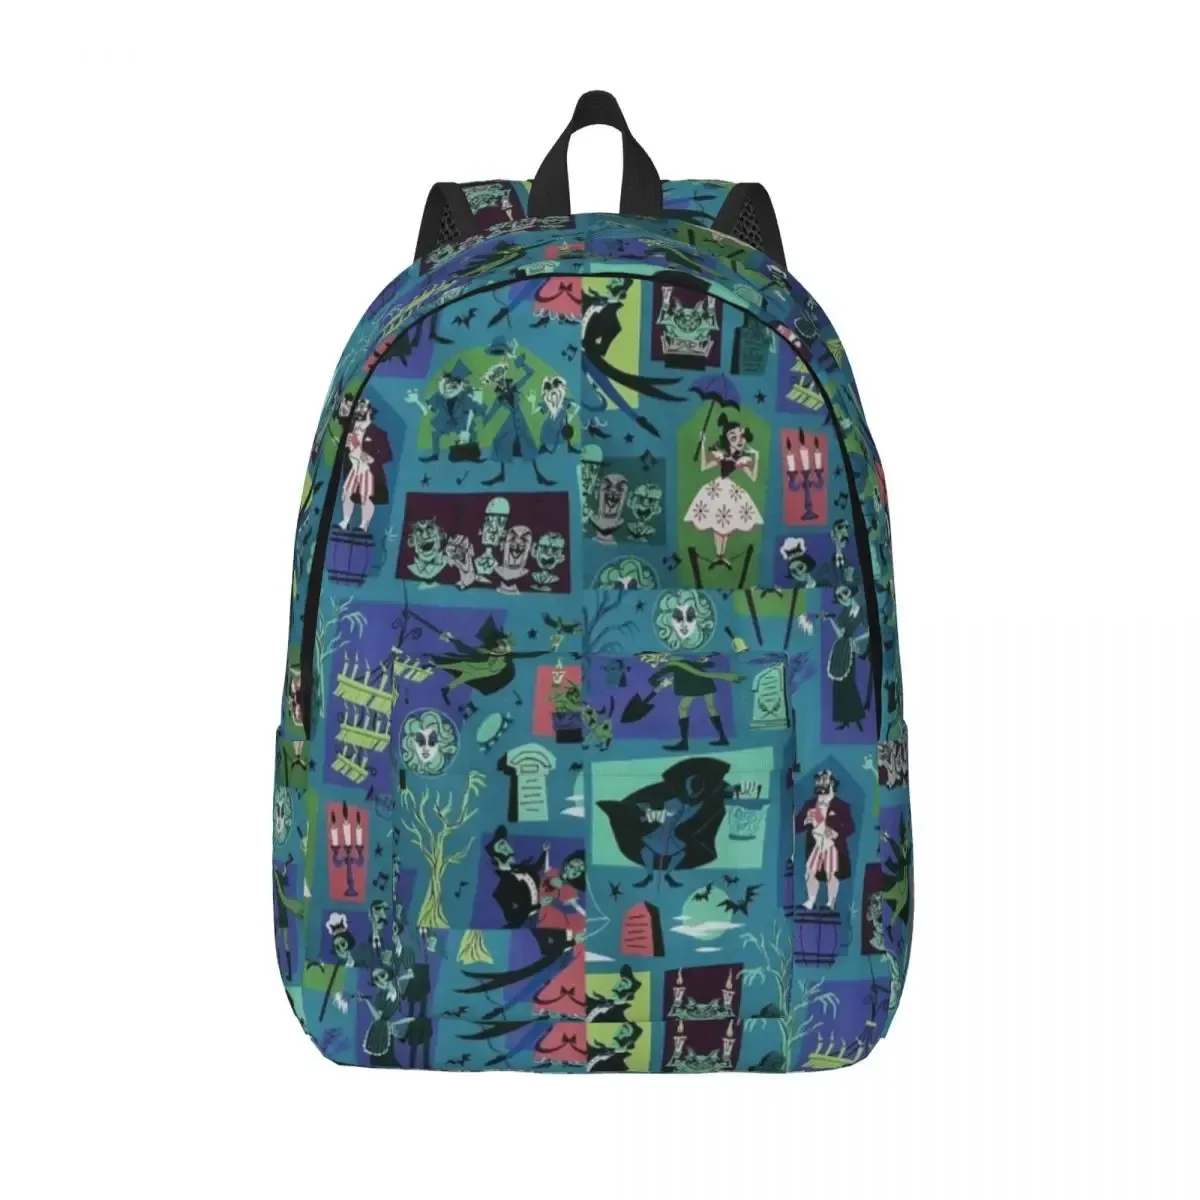 Sacs Hauted Mansion Haunted House Madame Canvas Backpack pour école imperméable College Halloween Ghost Sac Printing Bookbags